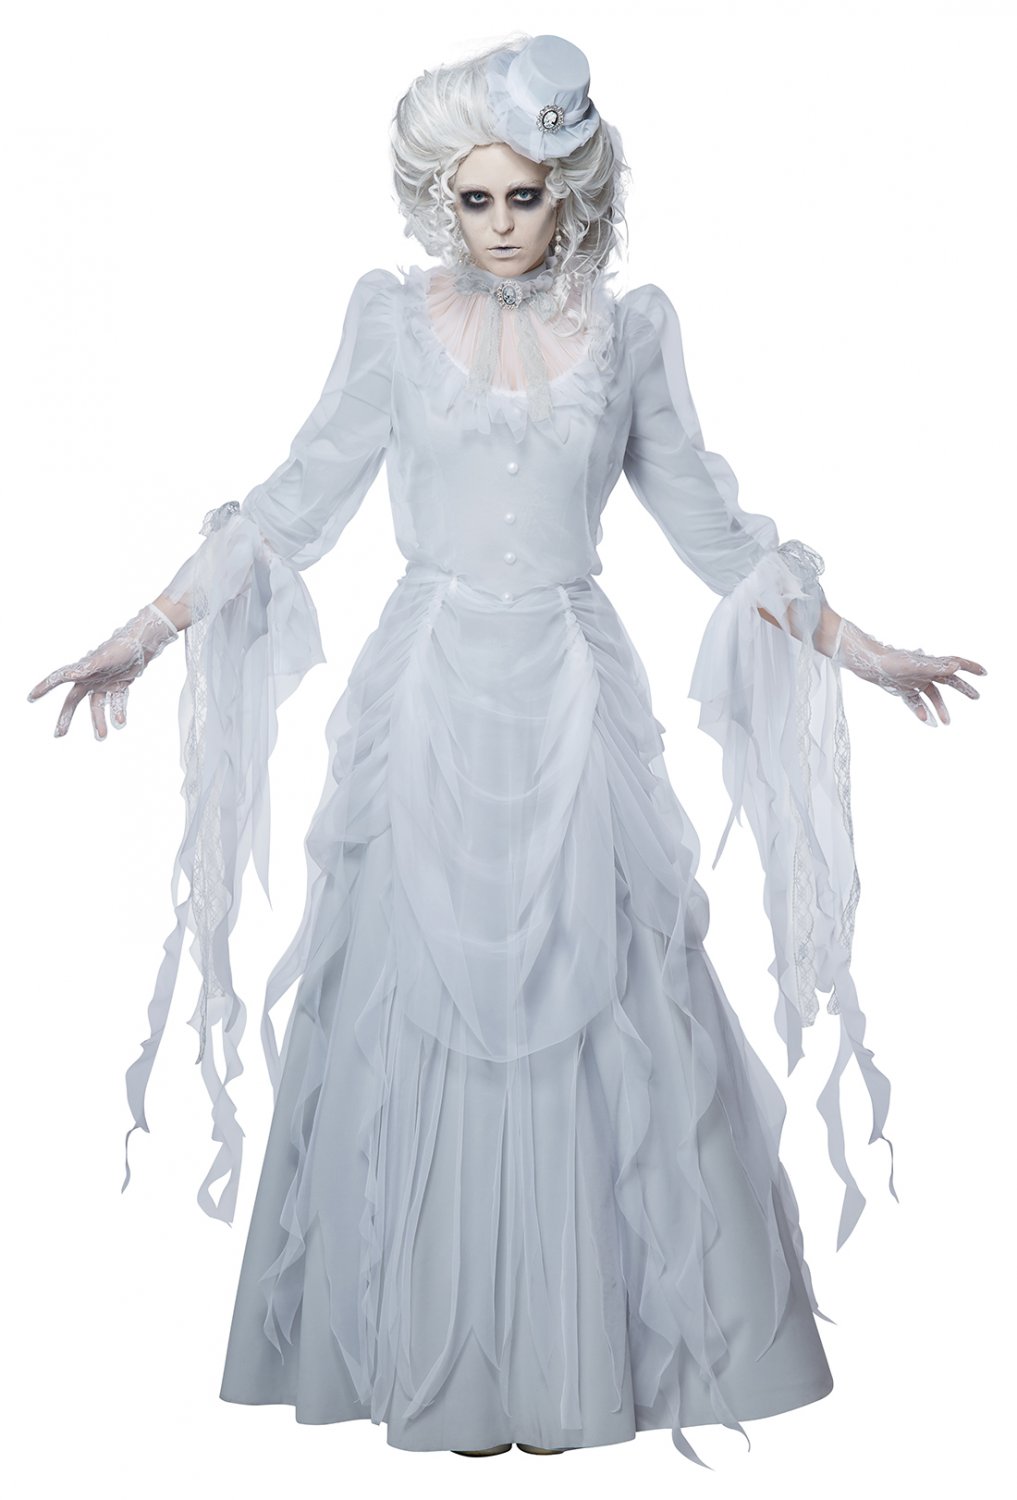 Size X Large 01474 Deluxe Disney Haunting Lady Ghostly Bride Adult